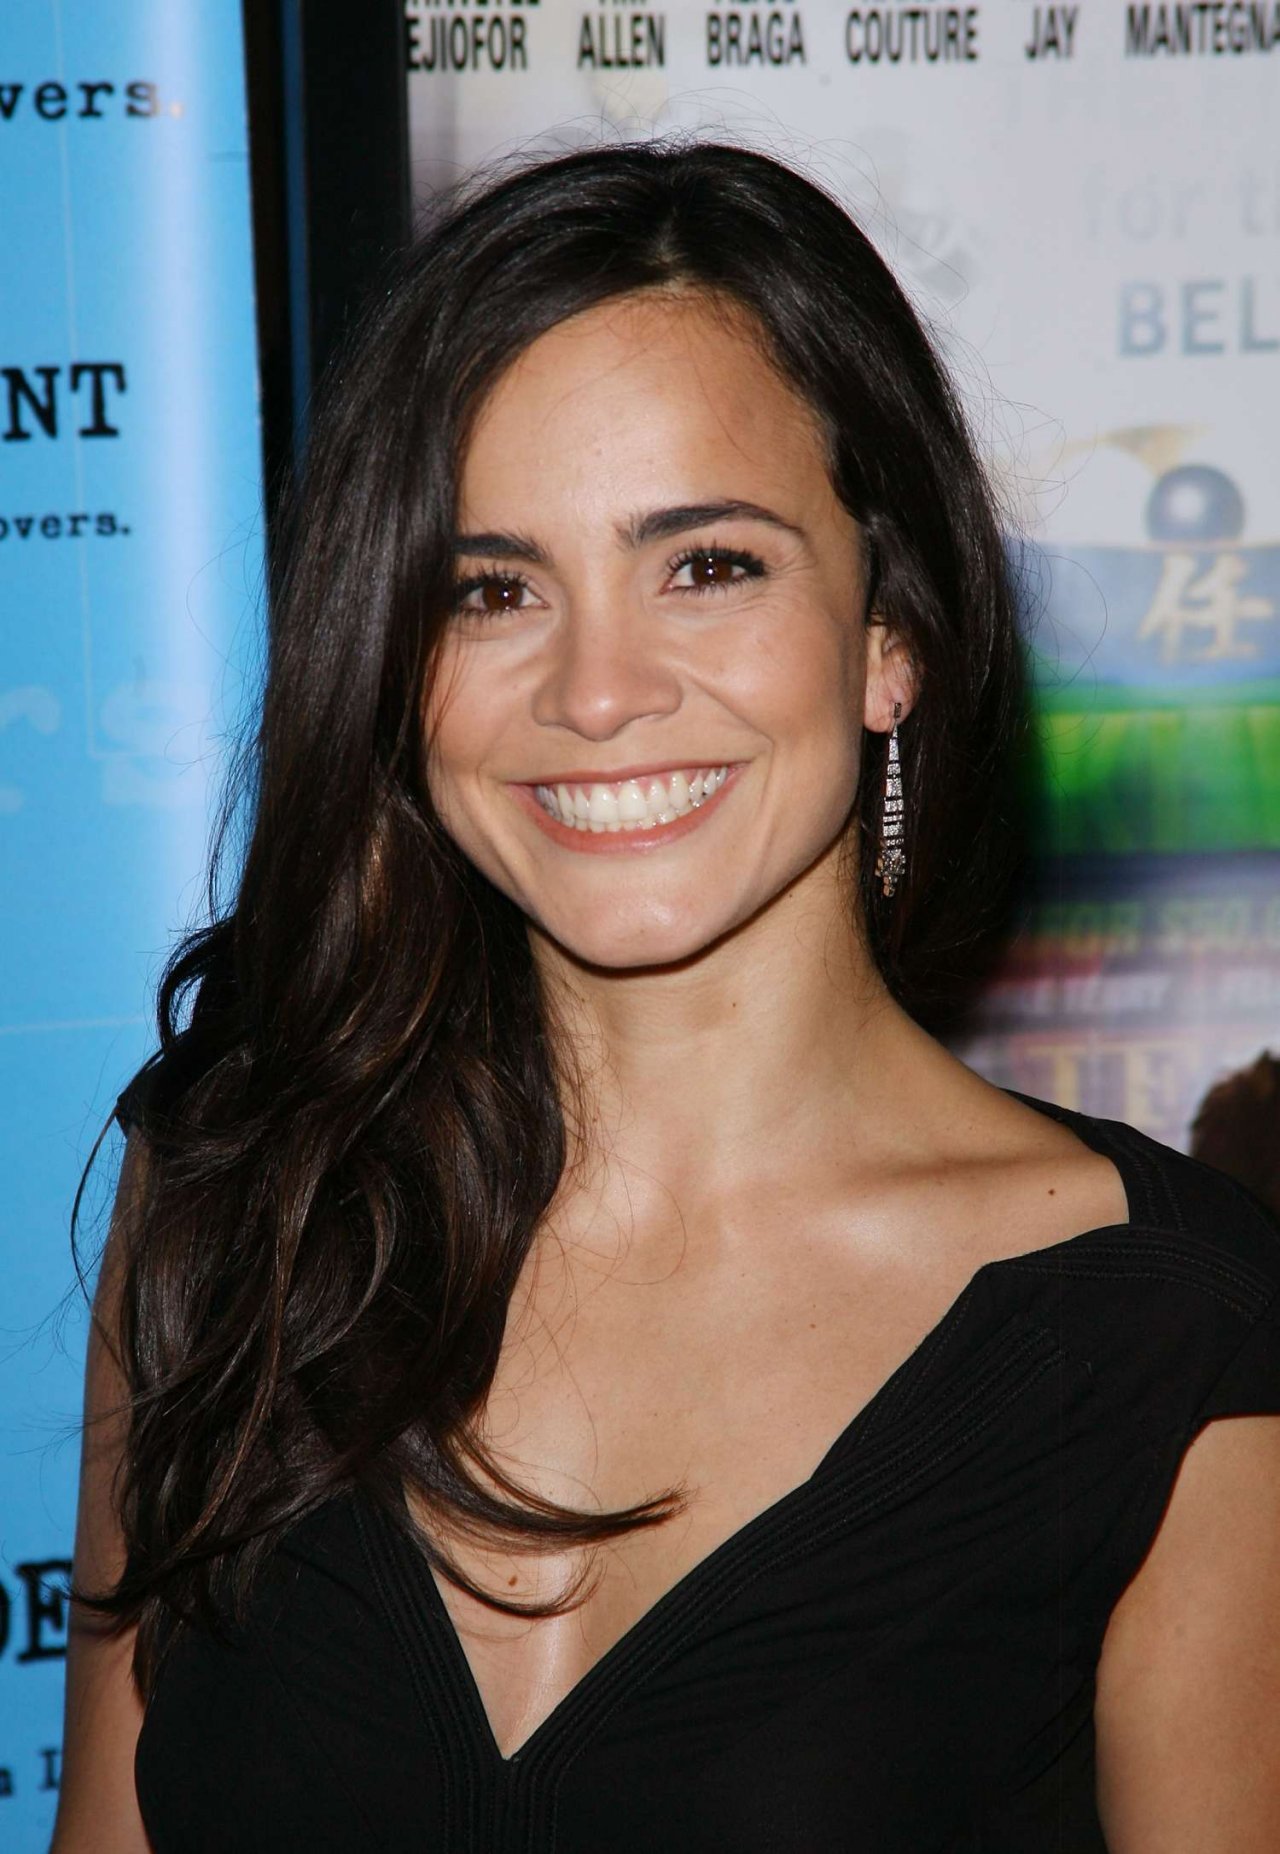 Alice Braga - Images Colection